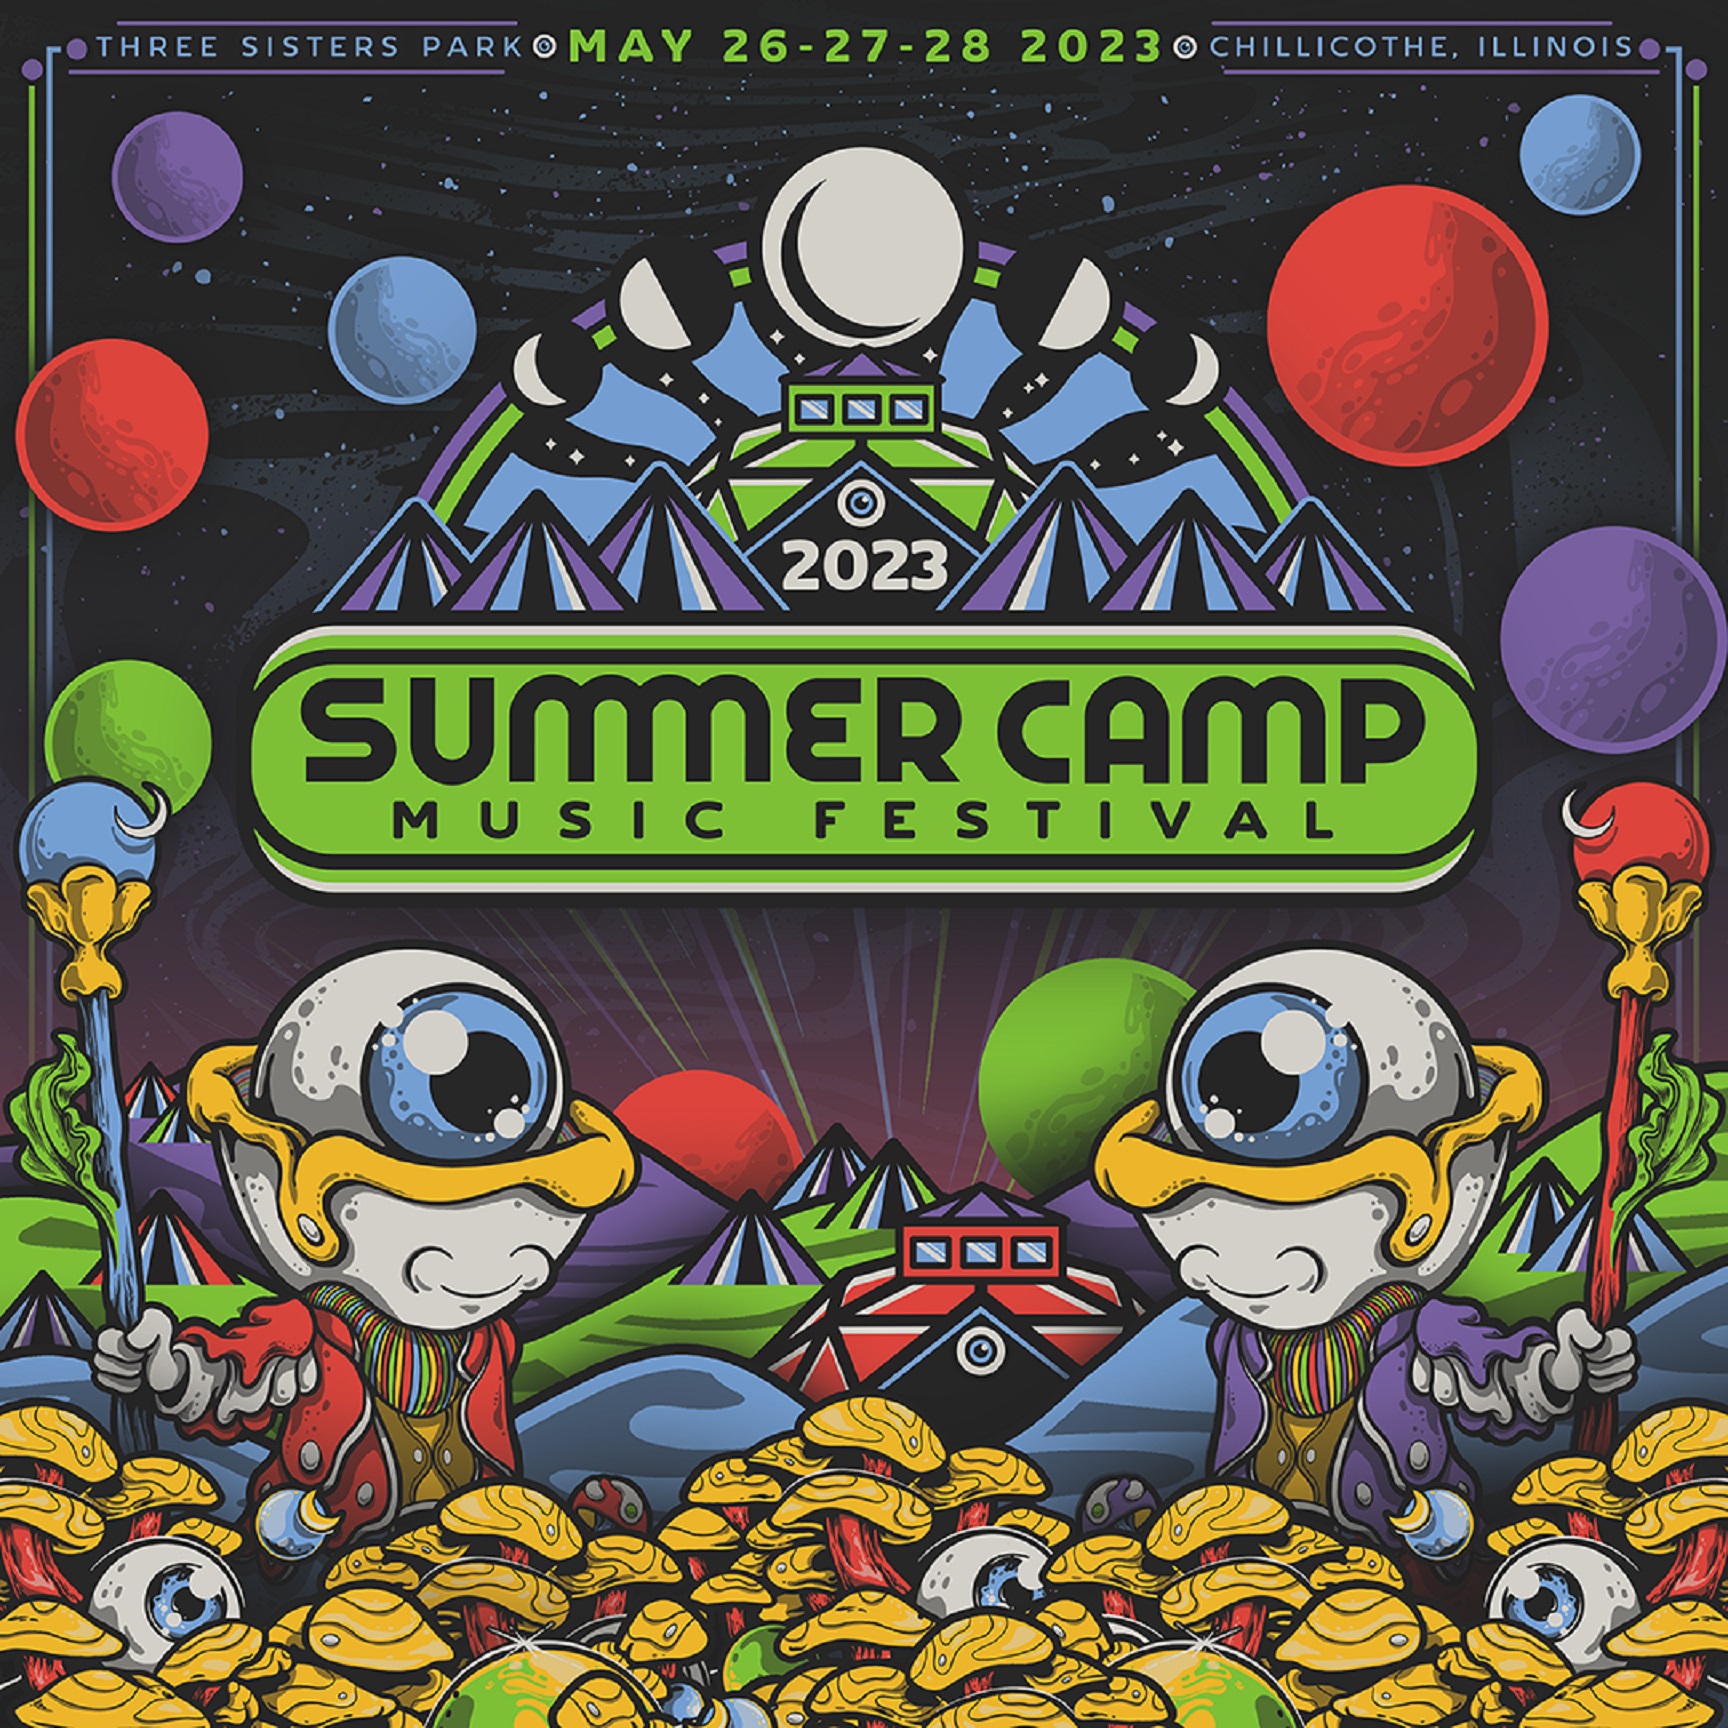 SUMMER CAMP MUSIC FESTIVAL RETURNS TO CHILLICOTHE, IL MEMORIAL DAY WEEKEND 2023